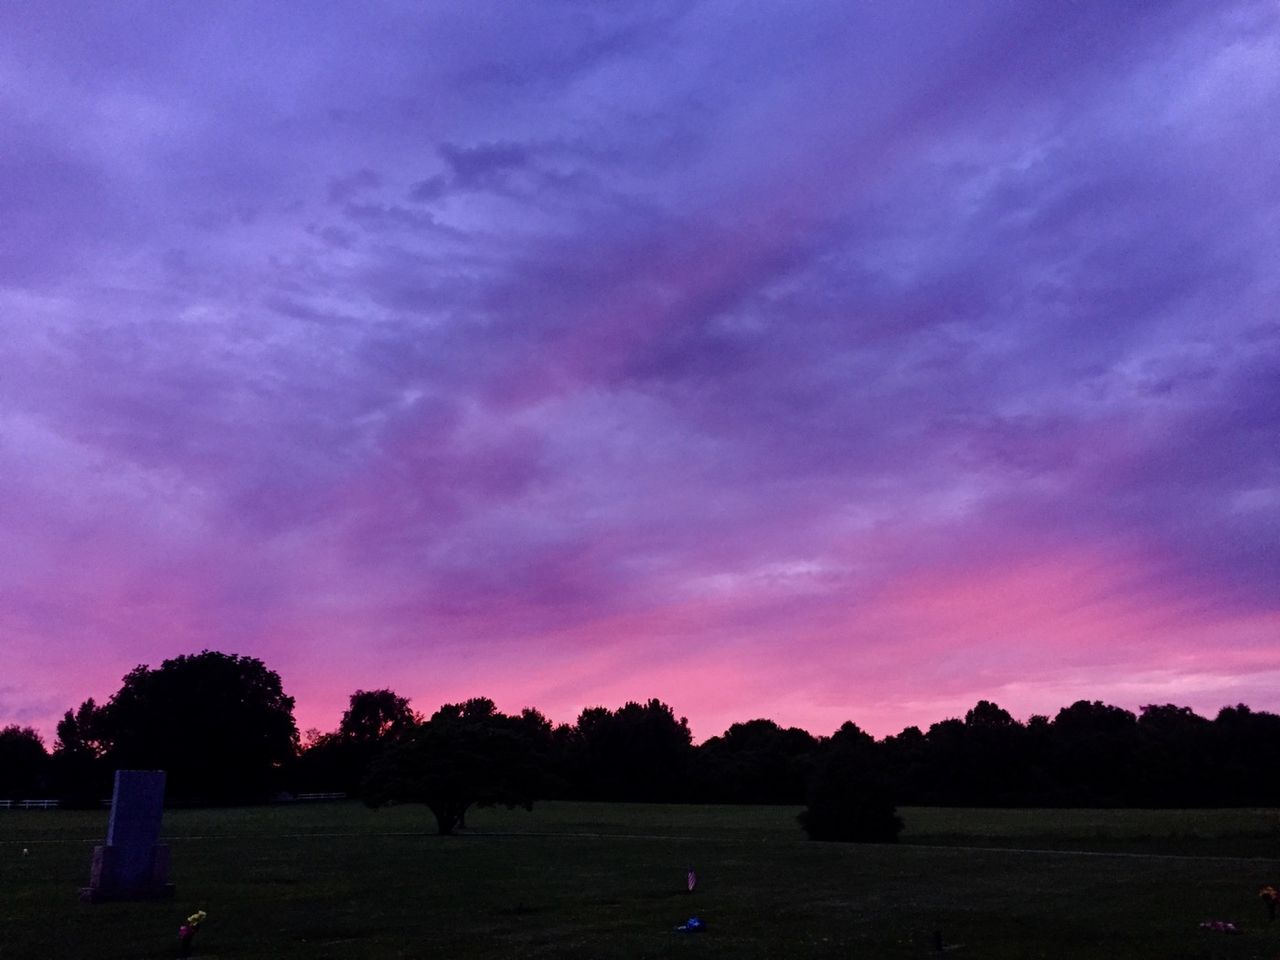 Pink and purple sky with trees on the horizon.